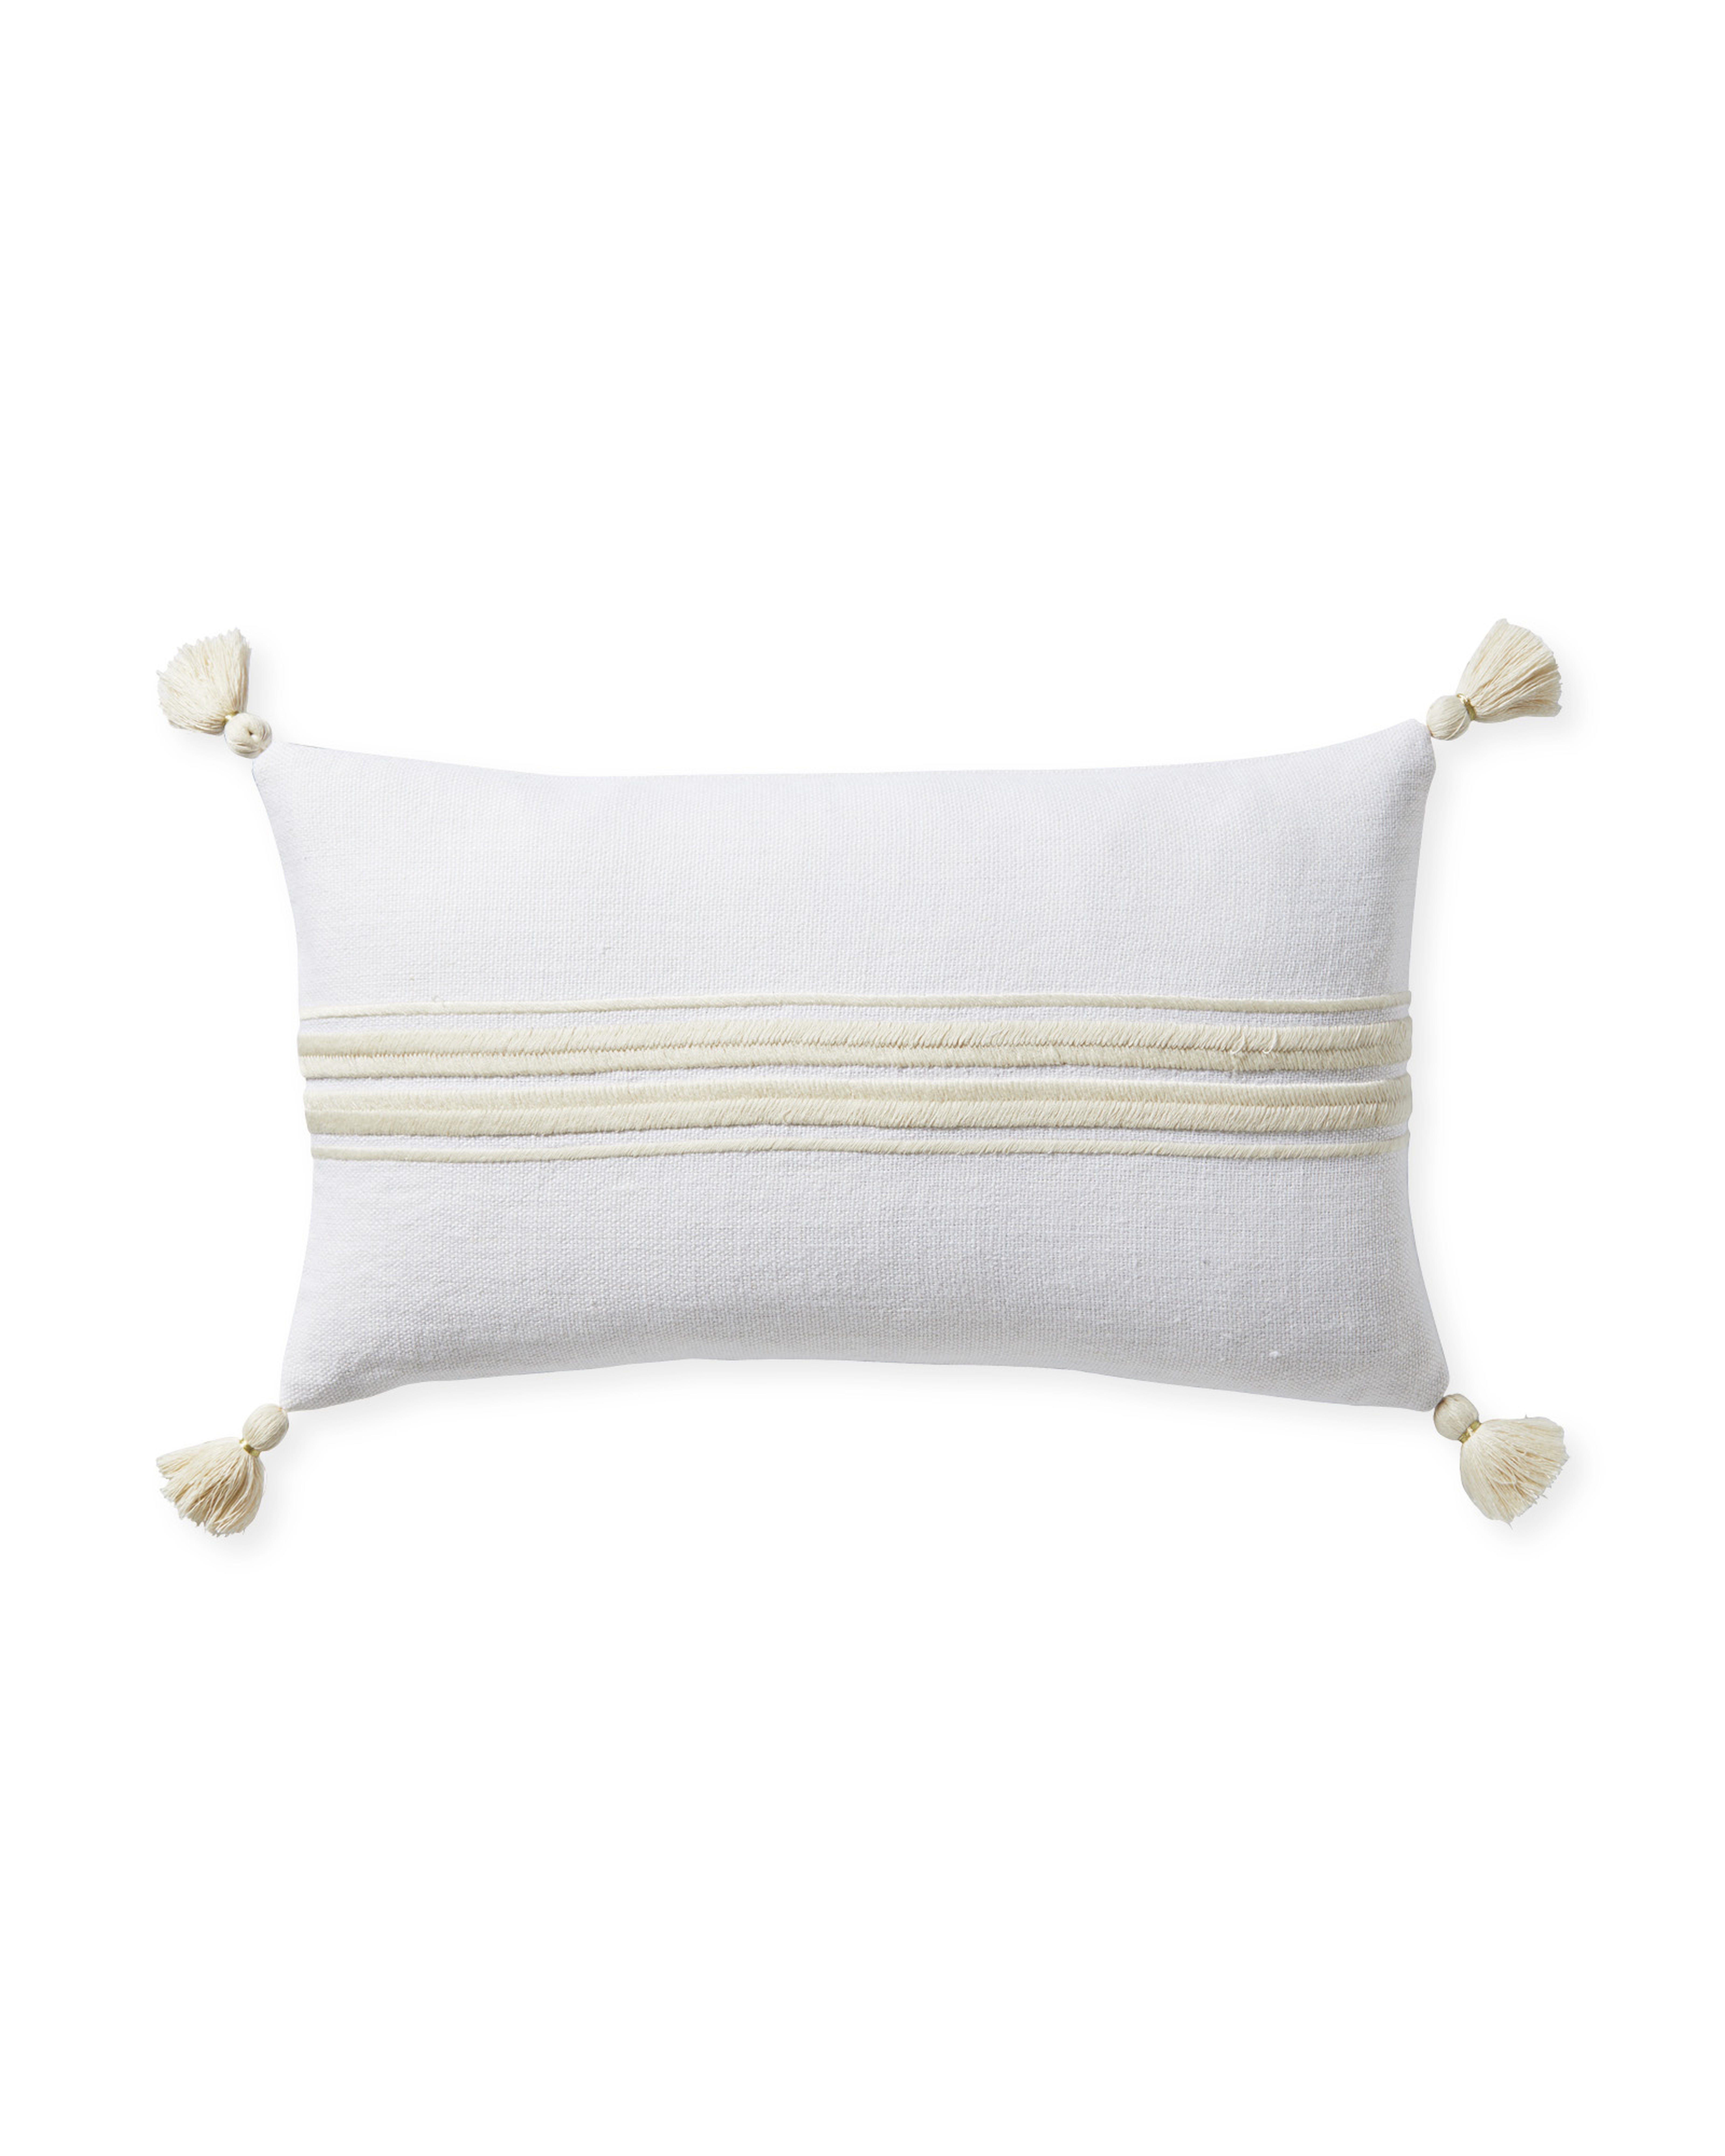 Addie Stripe Tassel 12" x 21" Pillow Cover - White/Ivory- Insert Sold Separately - Serena and Lily